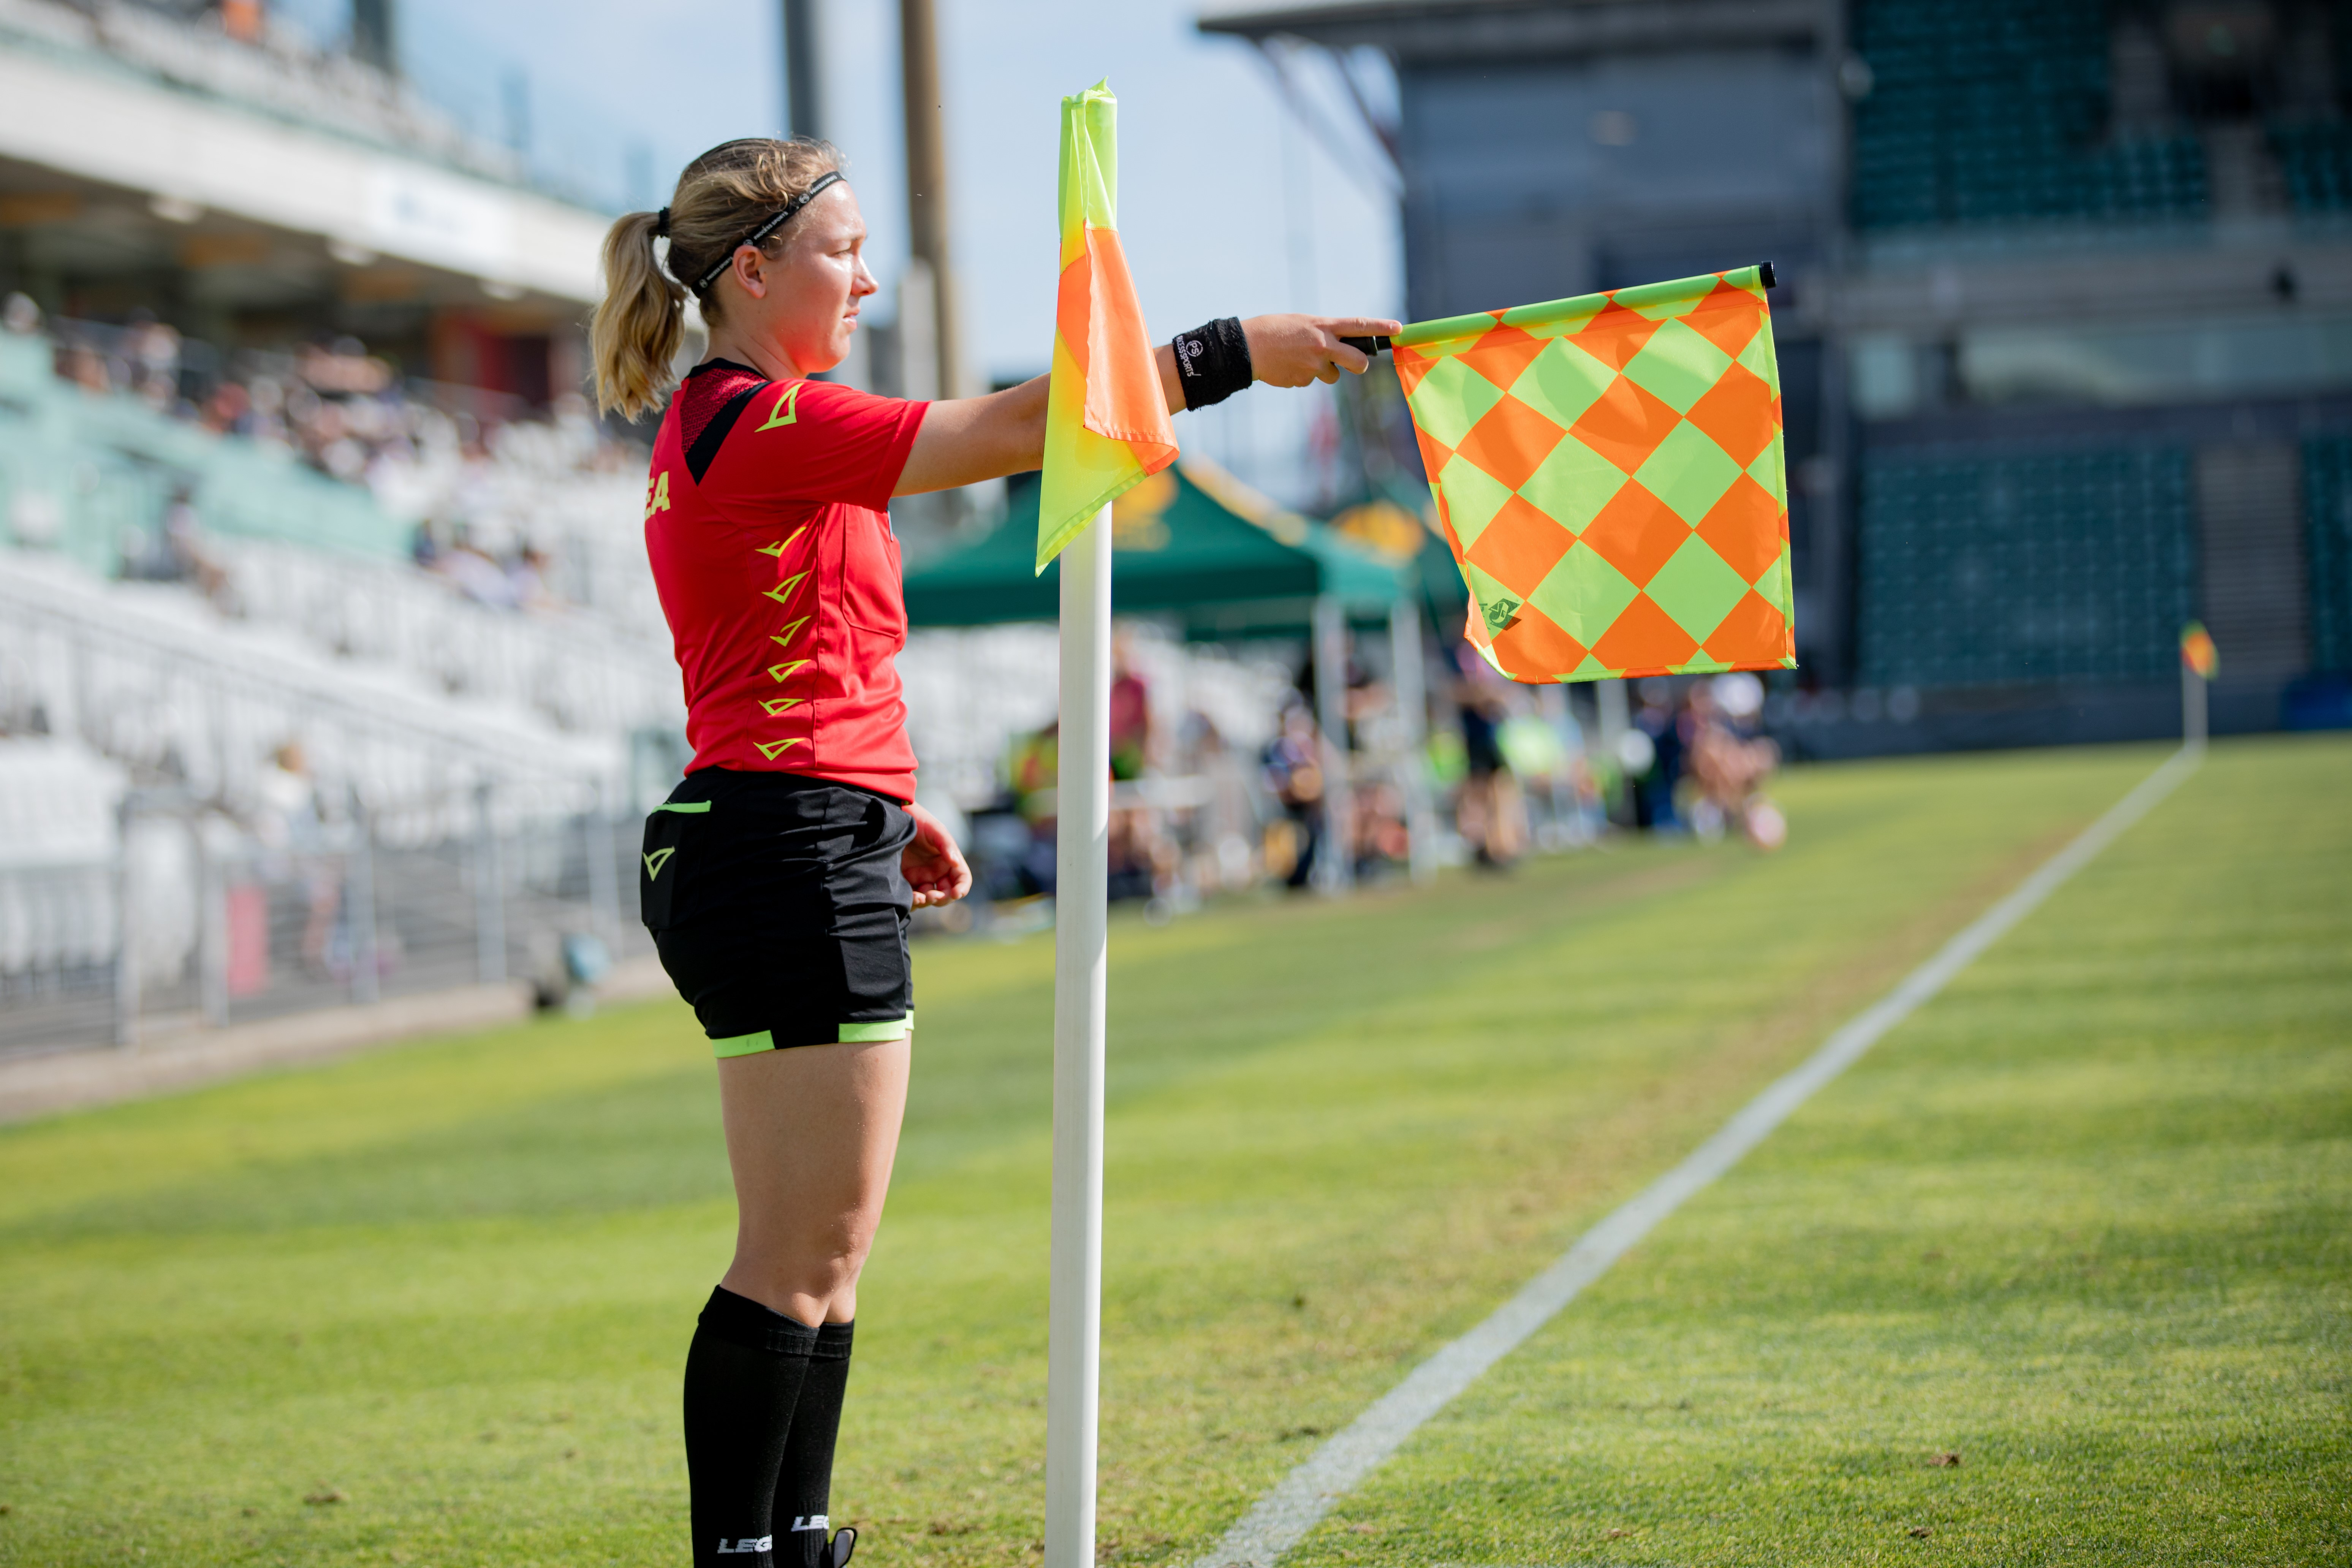 A soccer referee stands holding a flag